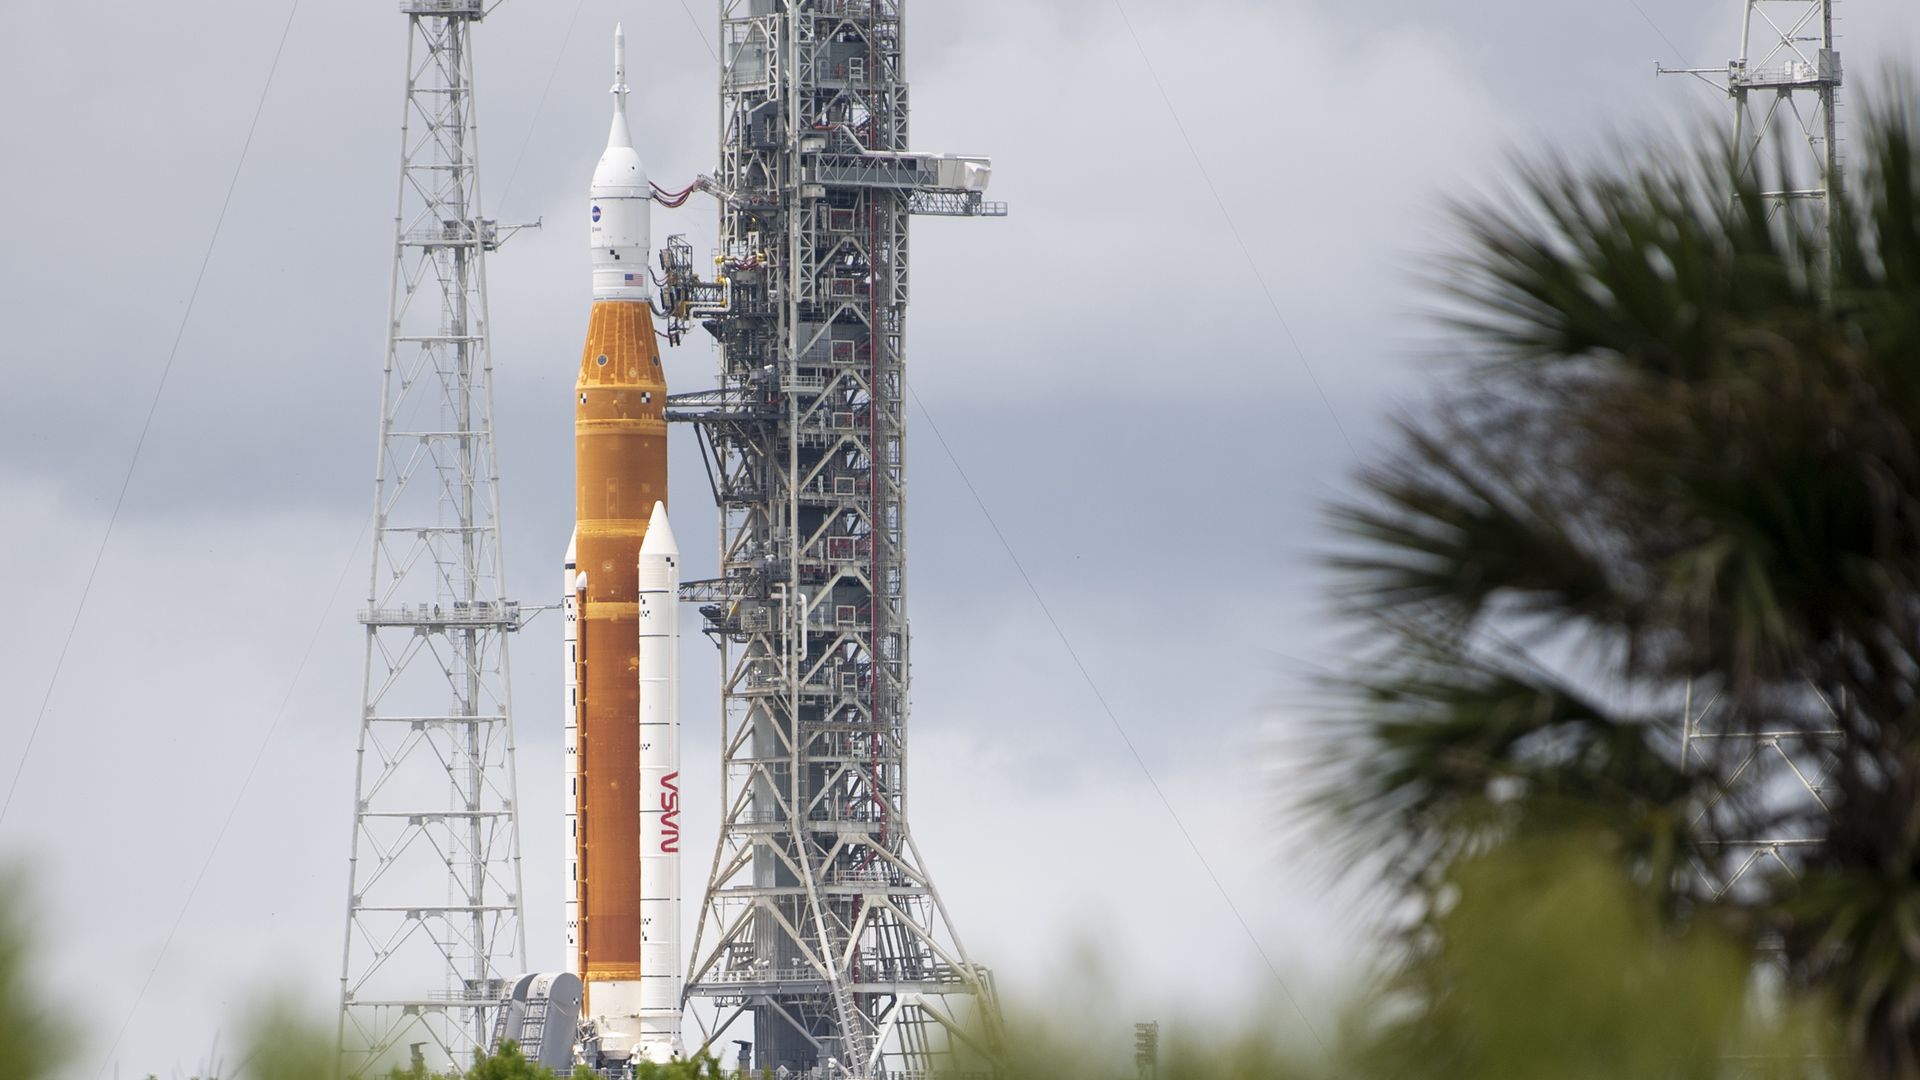 NASA's Space Launch System (SLS) rocket with the Orion spacecraft aboard is seen atop a mobile launcher.